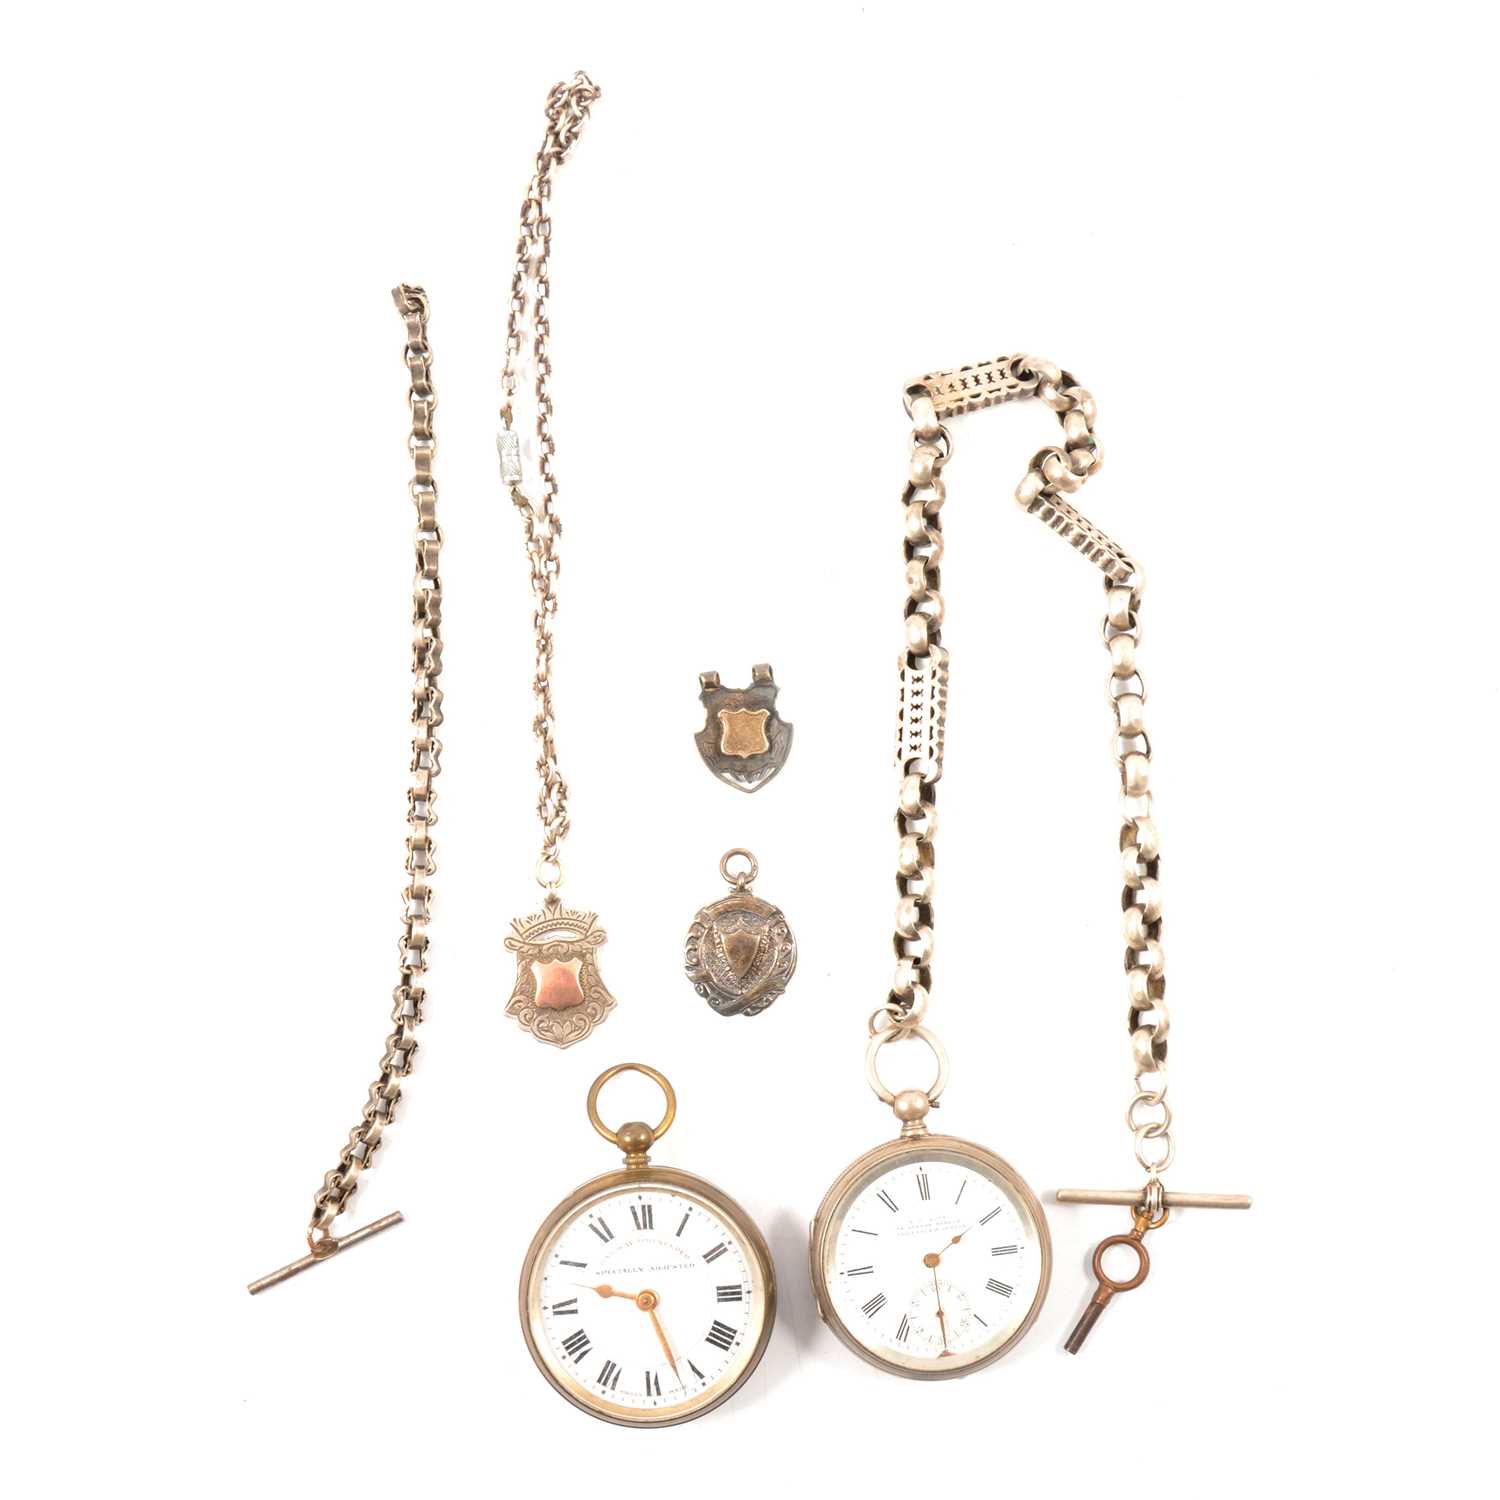 Two pocket watches, Albert watch chains and fobs.